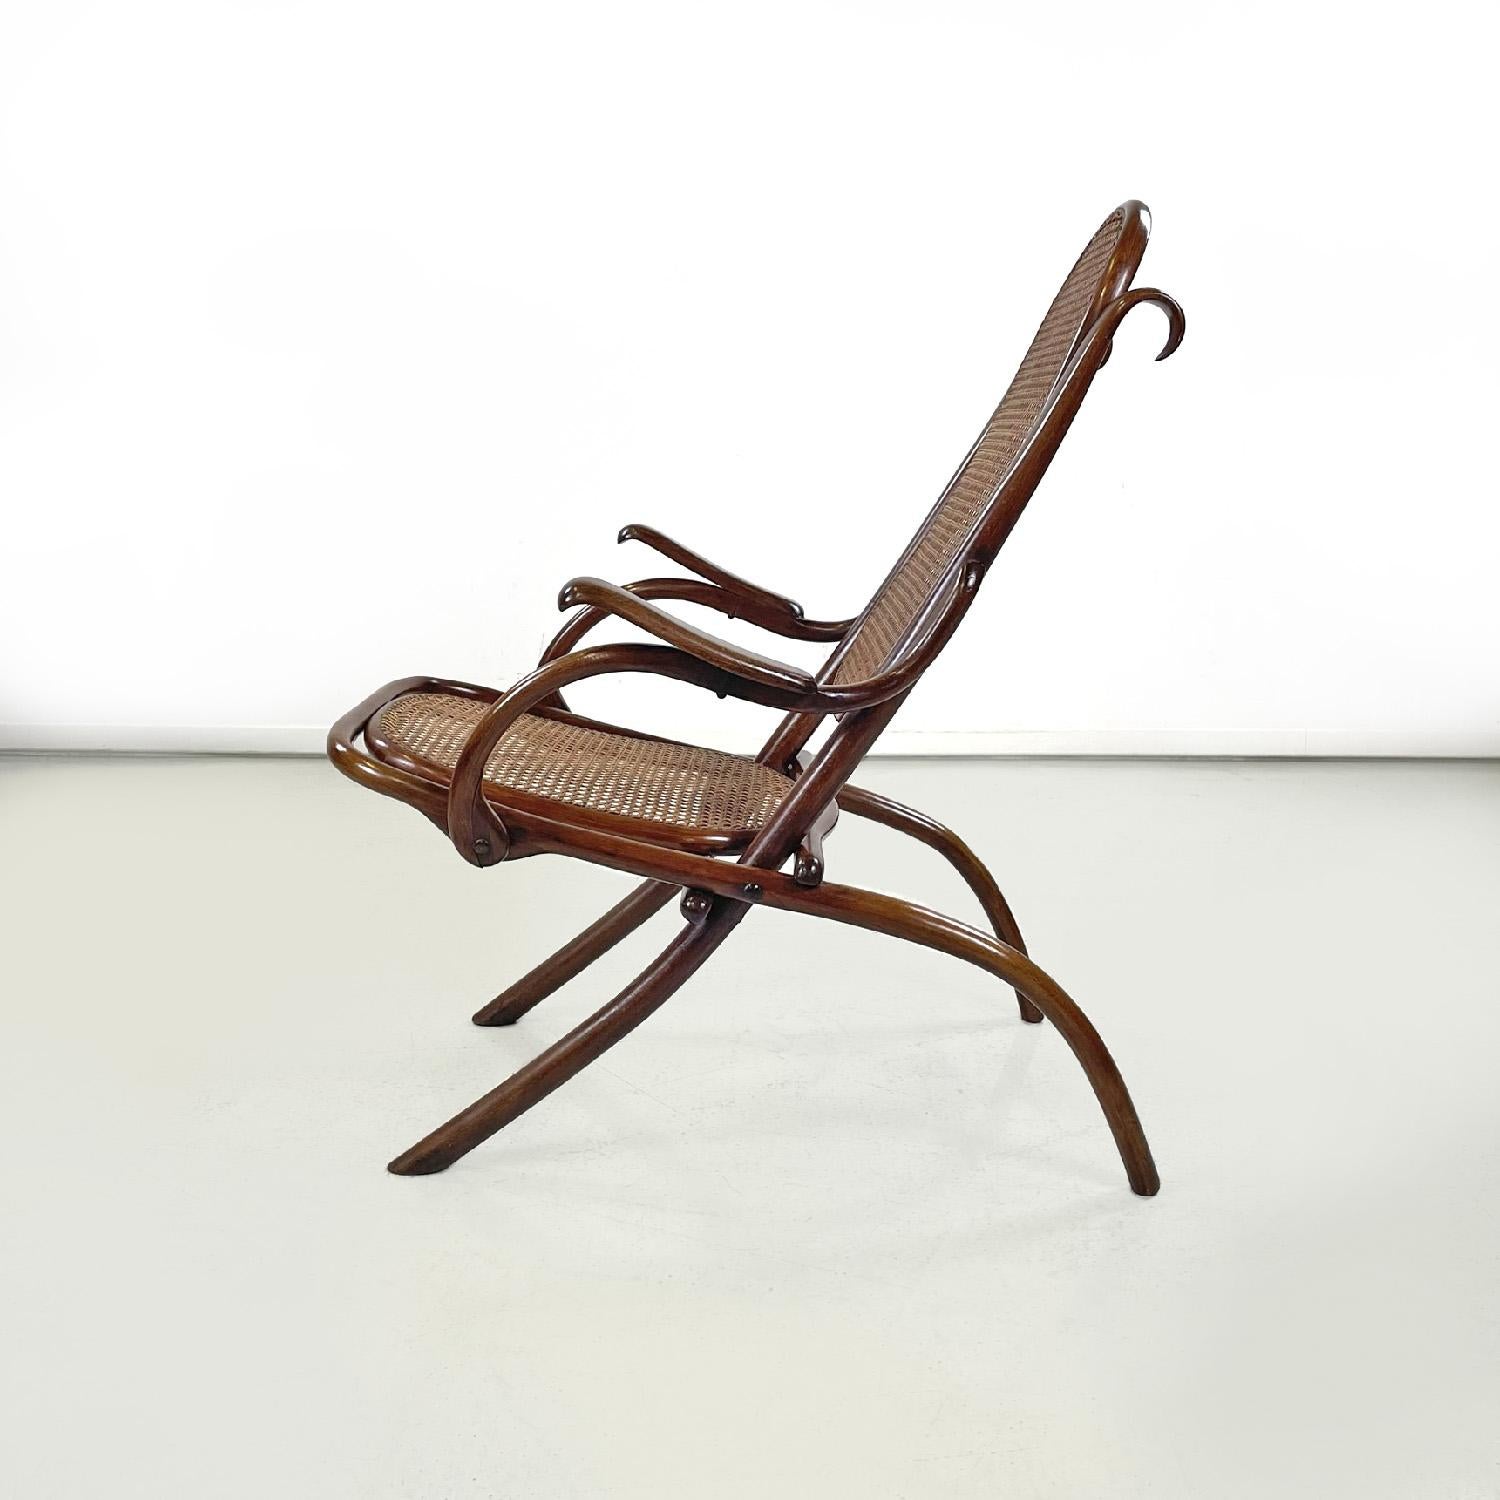 Austrian wooden Thonet armchair with Vienna straw, late 1800s
Armchair in wood and Vienna straw. The wooden structure has a round section and has rounded lines that form the elements of the armchair such as the armrests, the legs and the two tapered